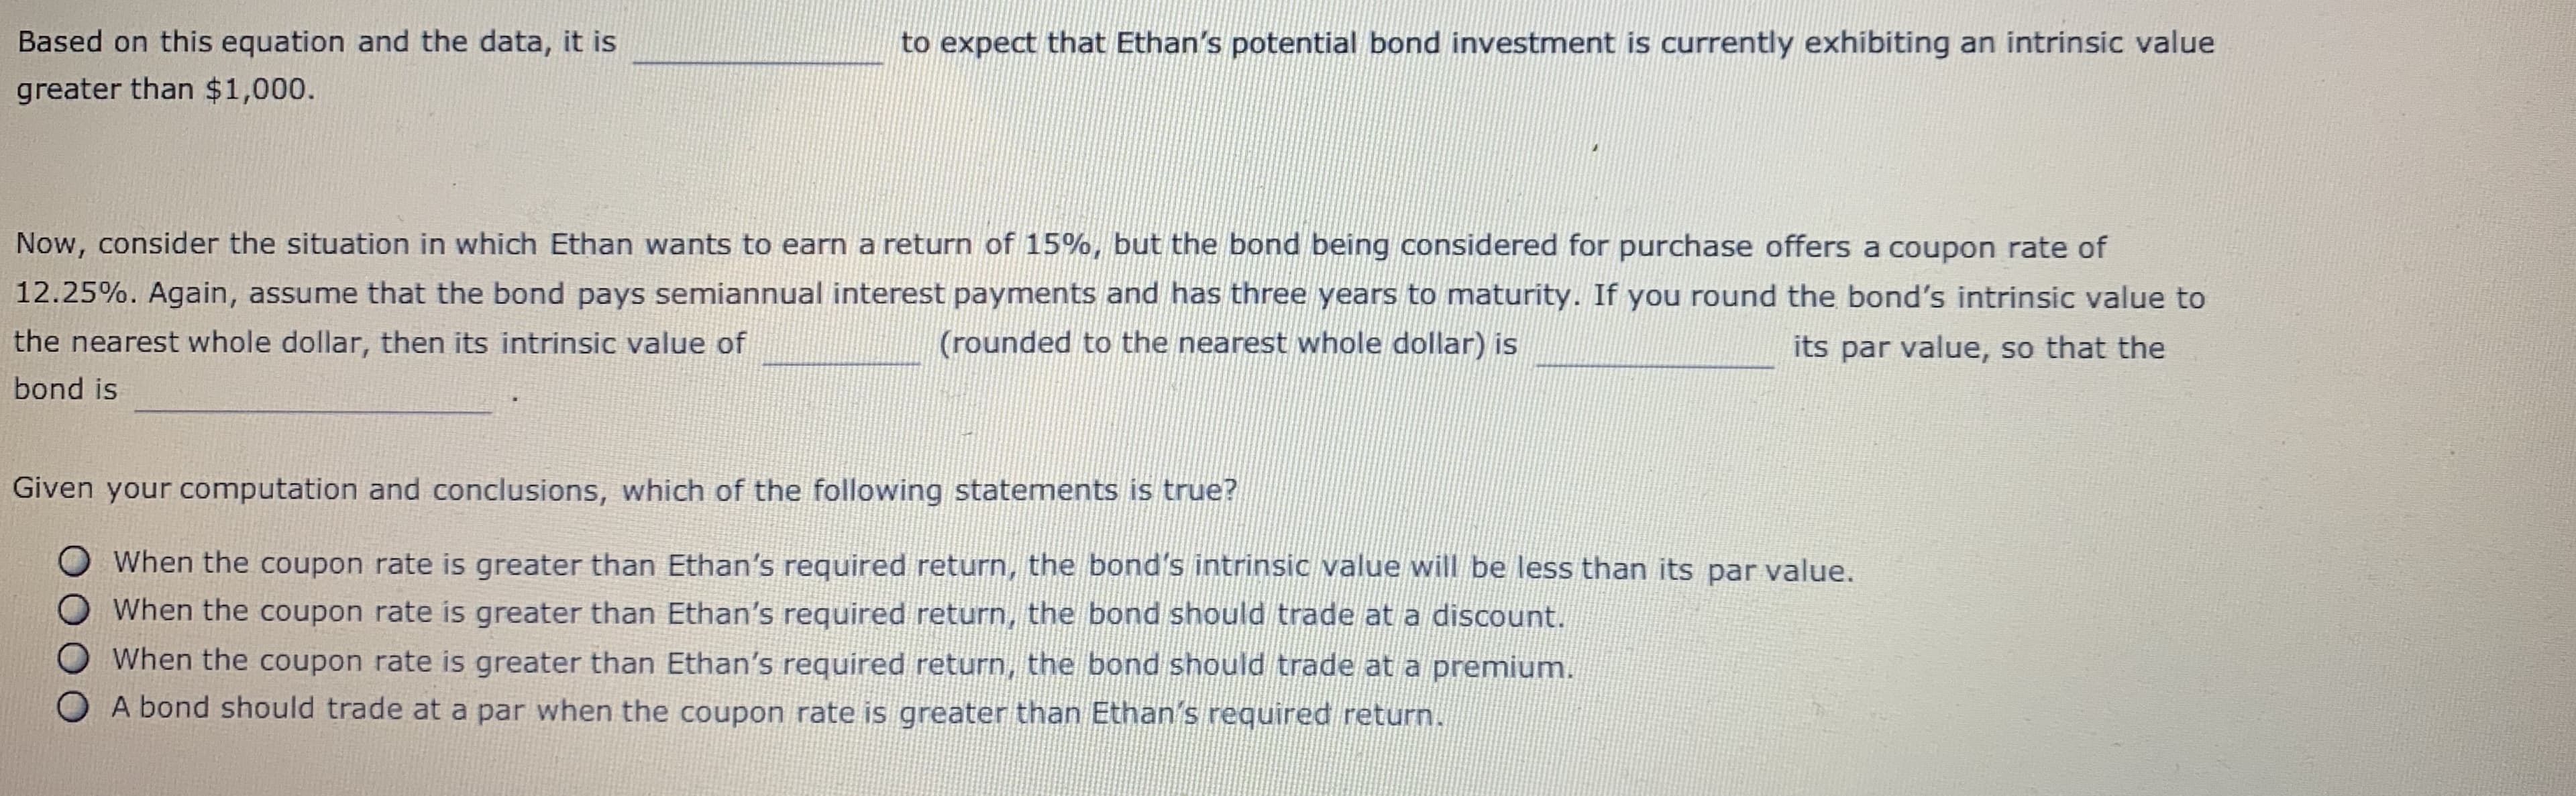 Based on this equation and the data, it is
greater than $1,000.
to expect that Ethan's potential bond investment is currently exhibiting an intrinsic value
Now, consider the situation in which Ethan wants to earn a return of 15%, but the bond being considered for purchase offers a coupon rate of
12.25%. Again, assume that the bond pays semiannual interest payments and has three years to maturity. If you round the bond's intrinsic value to
the nearest whole dollar, then its intrinsic value of
bond is
(rounded to the nearest whole dollar) is
its par value, so that the
Given your computation and conclusions, which of the following statements is true?
when the coupon rate is greater than Ethan's required return, the bond's intrinsic value will be less than its par value.
O When the coupon rate is greater than Ethan's required return, the bond should trade at a discount.
O When the coupon rate is greater than Ethan's required return, the bond should trade at a premium.
O A bond should trade at a par when the coupon rate is greater than Ethan's required return
